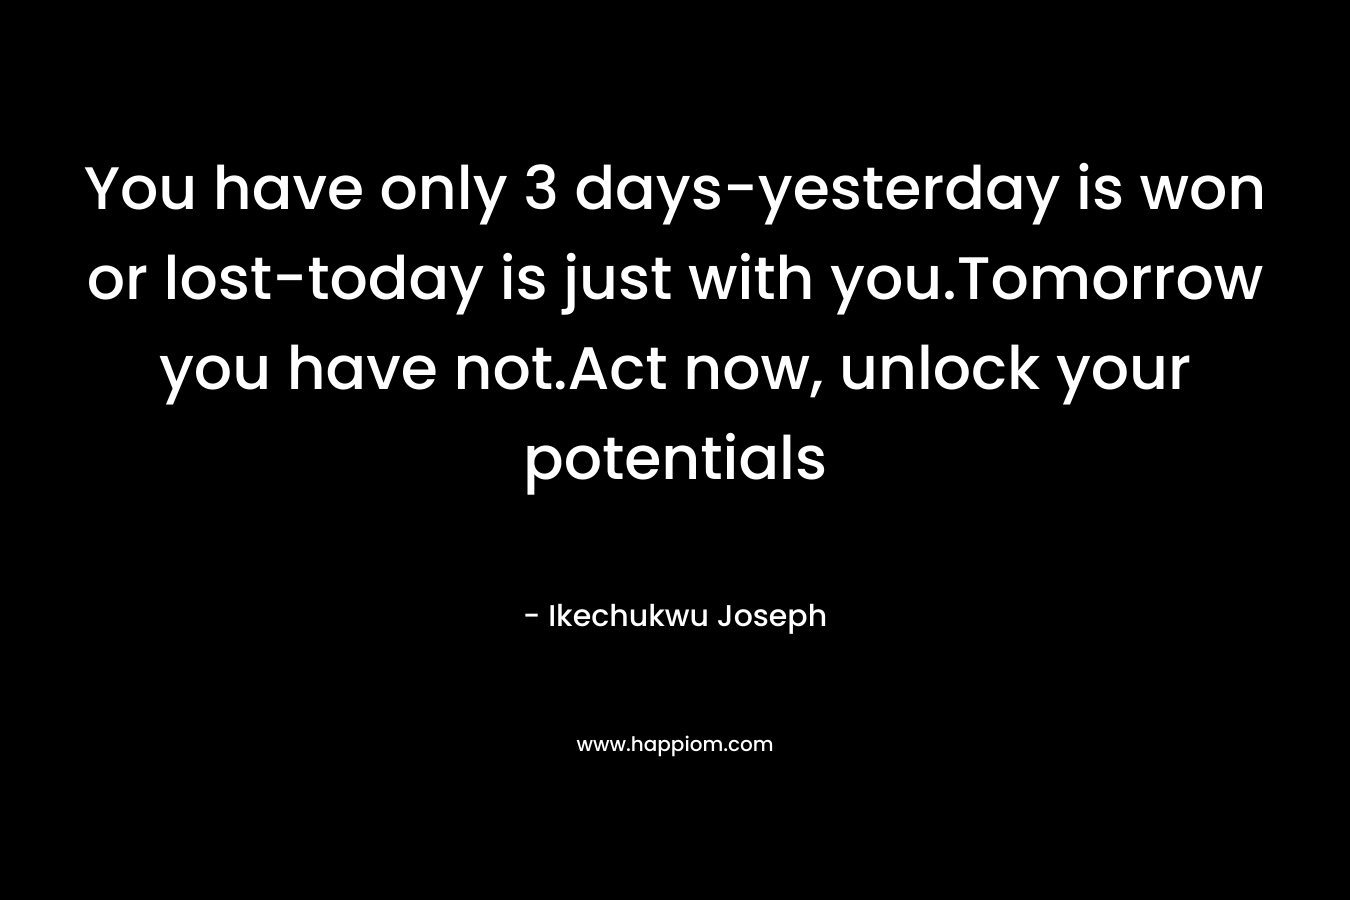 You have only 3 days-yesterday is won or lost-today is just with you.Tomorrow you have not.Act now, unlock your potentials